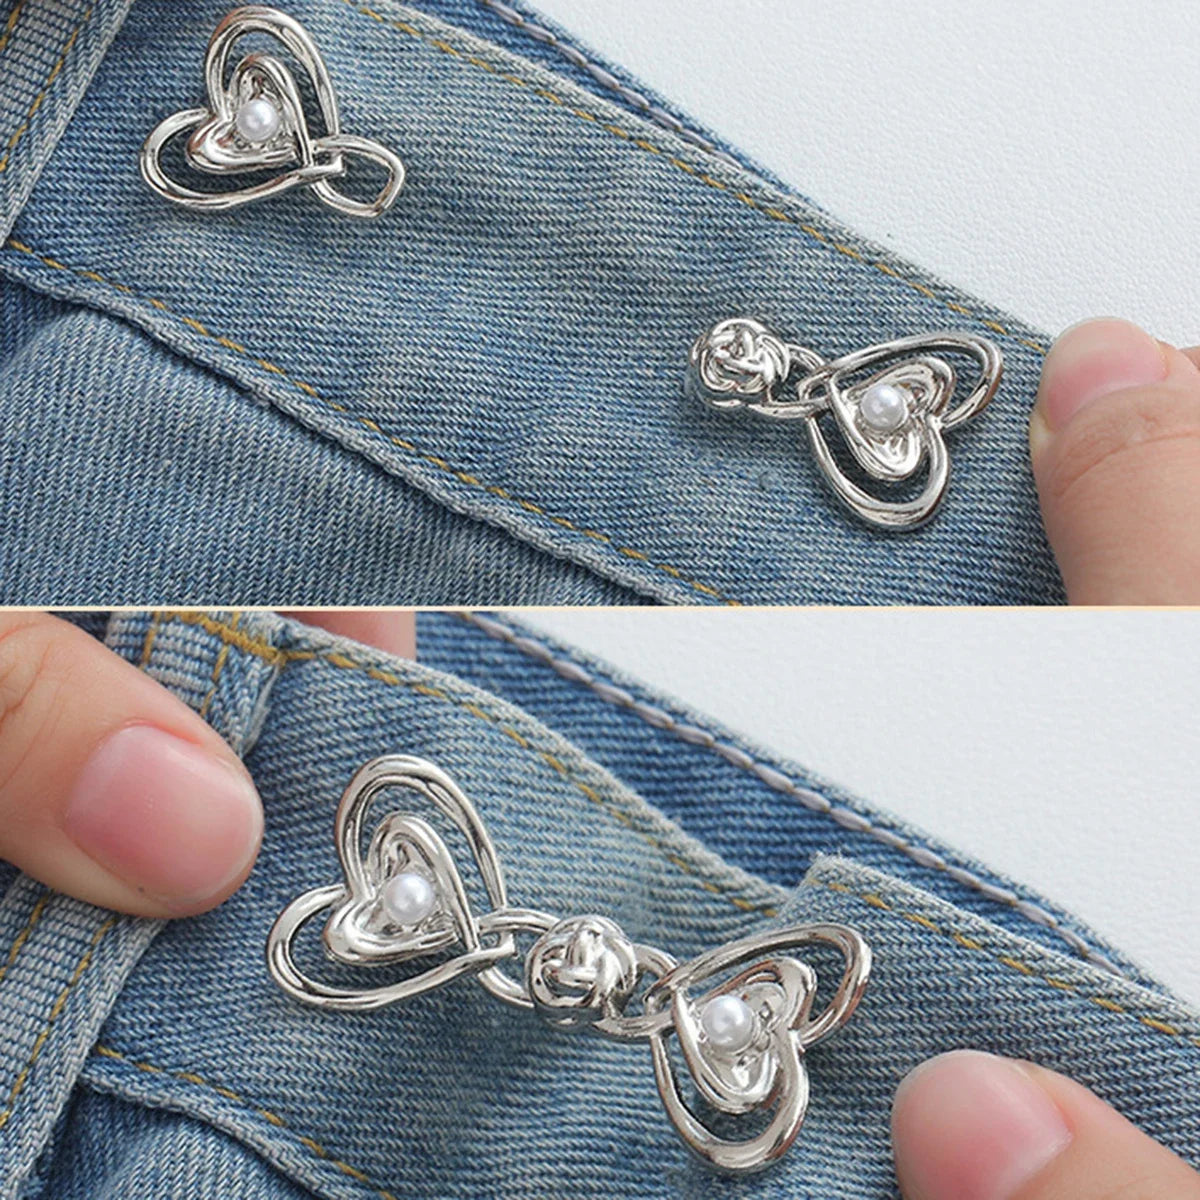 Adjustable Detachable Heart Button Fasteners No Sewing Required Waist Buckle for Jeans Adjuster for Pants and Skirts